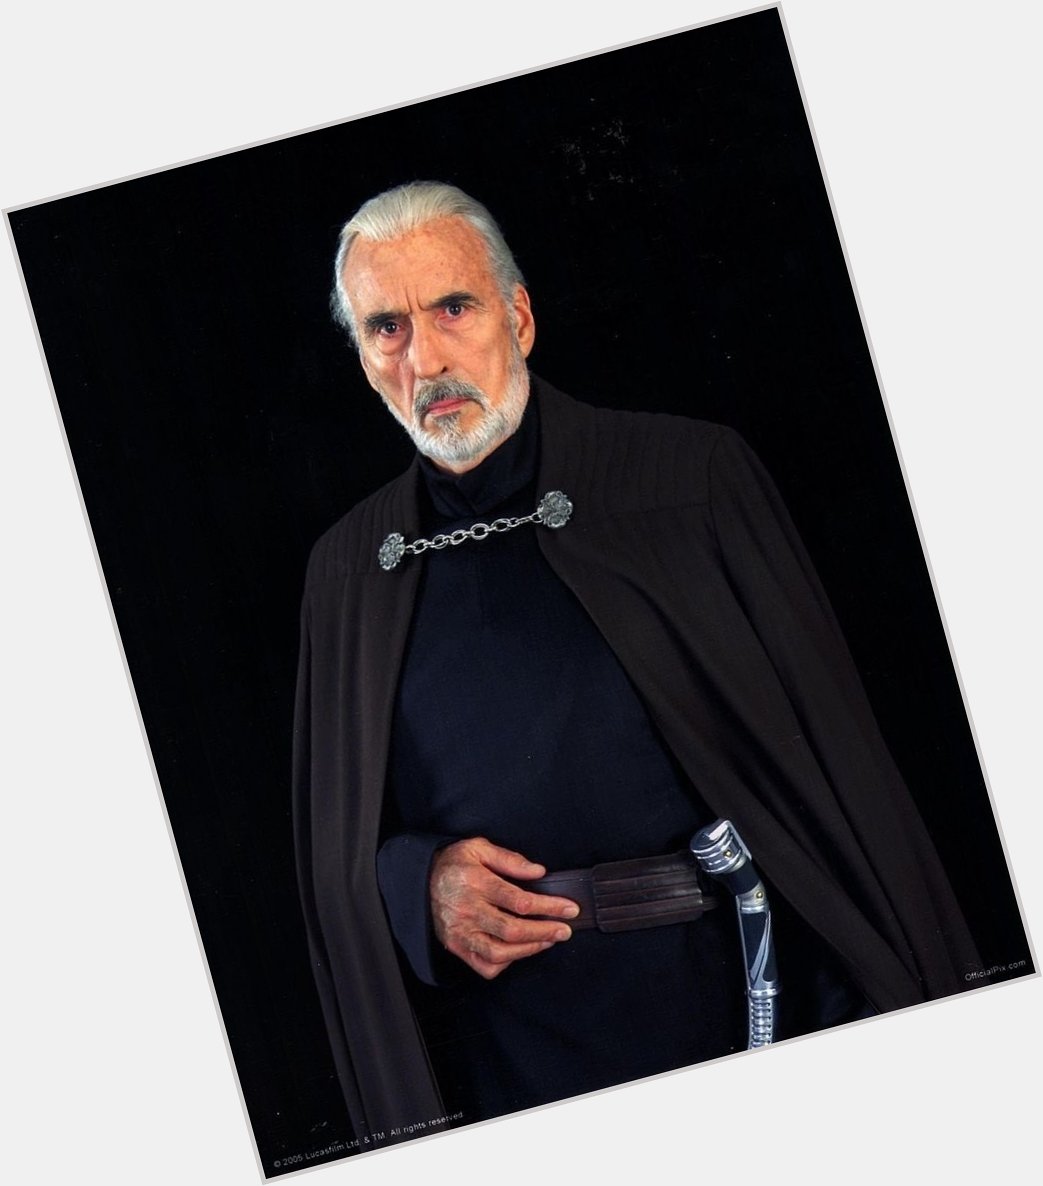 Happy bday to Dave filoni, but RIP to Christopher Lee 